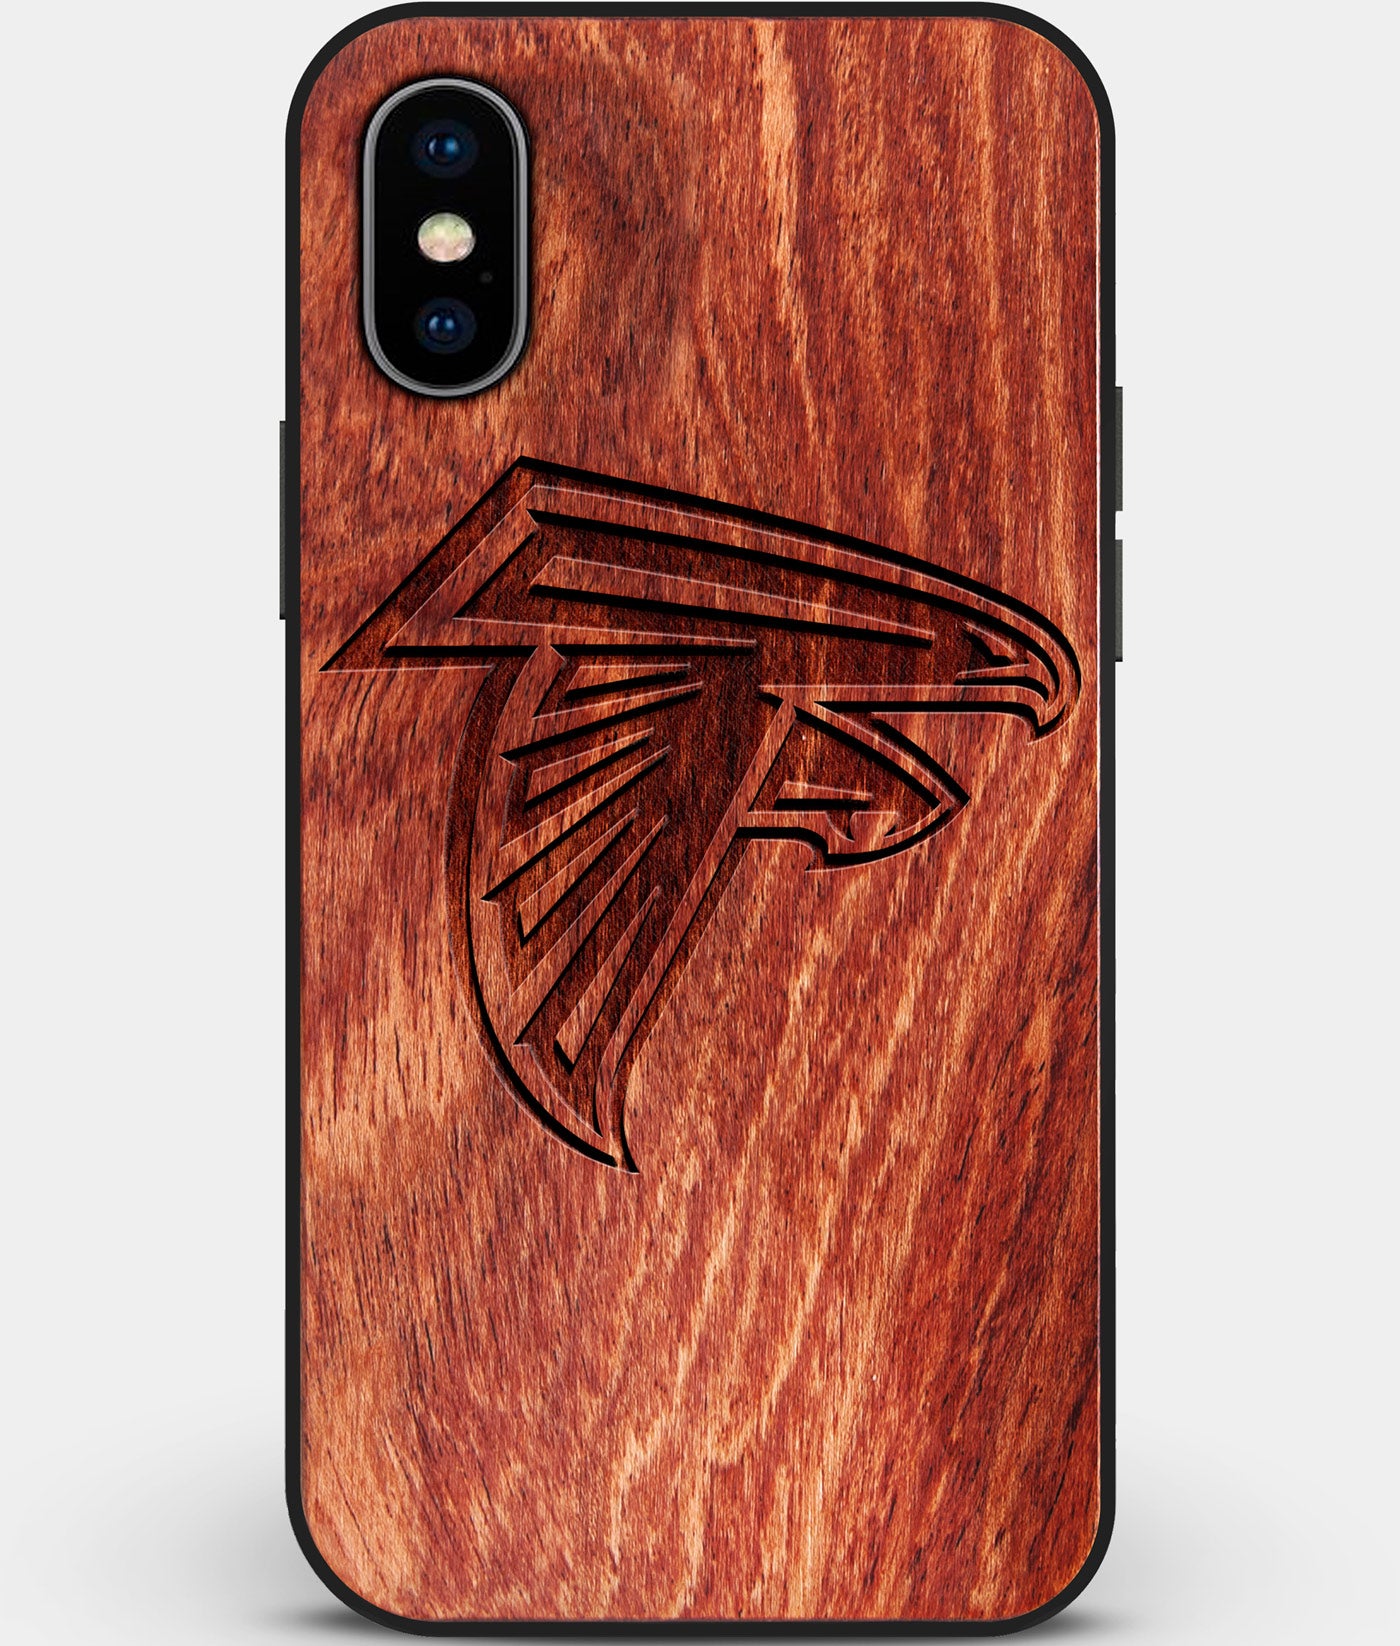 Custom Carved Wood Atlanta Falcons iPhone X/XS Case | Personalized Mahogany Wood Atlanta Falcons Cover, Birthday Gift, Gifts For Him, Monogrammed Gift For Fan | by Engraved In Nature